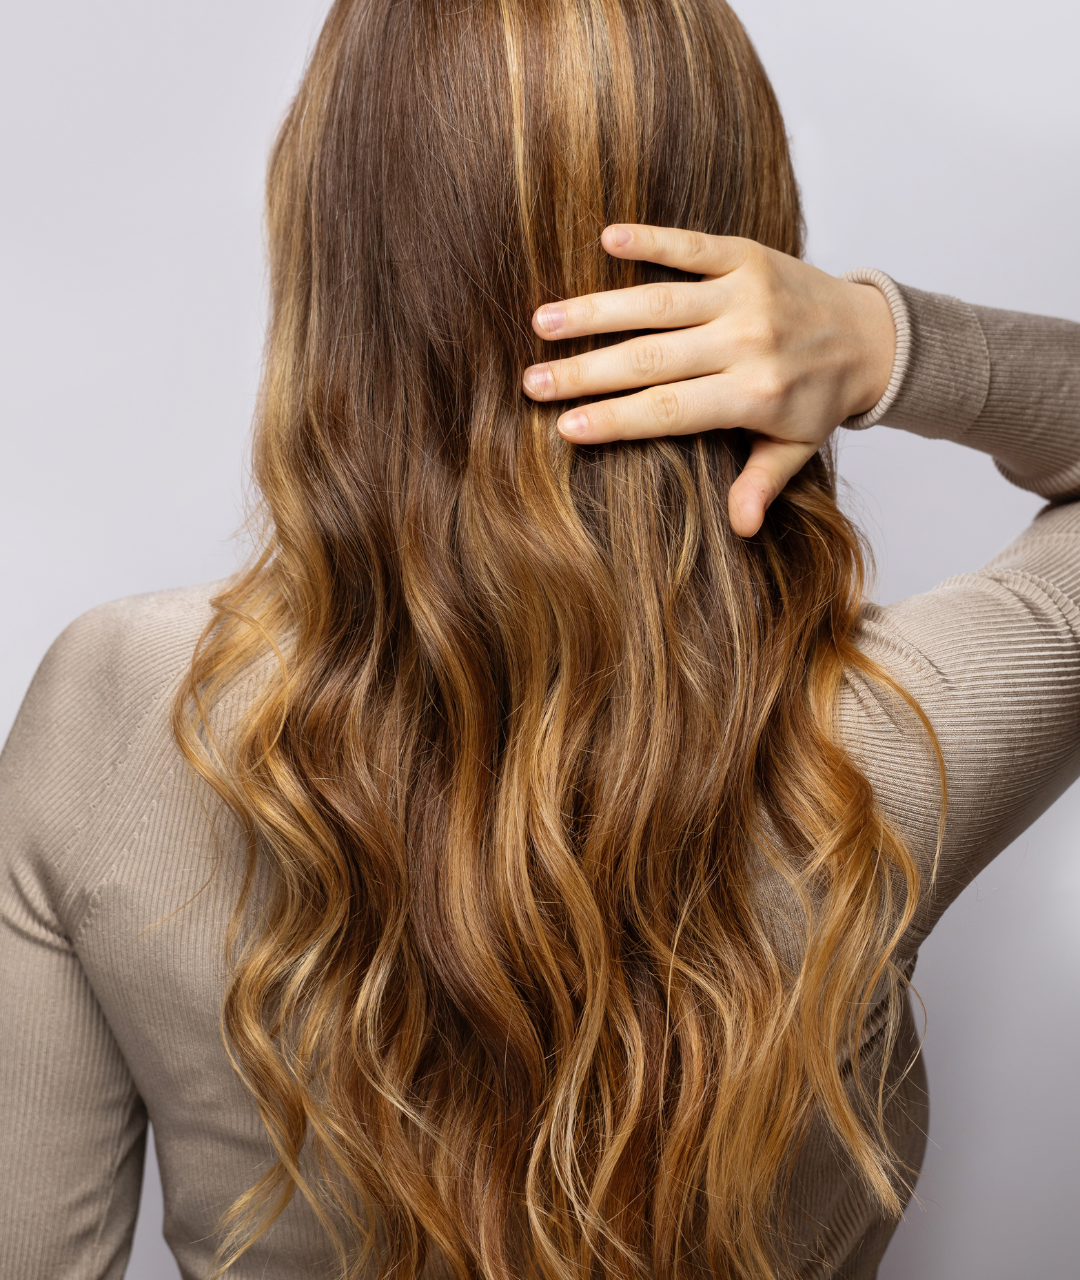 How to Properly Take Care of Your Hand-tied Hair Extensions